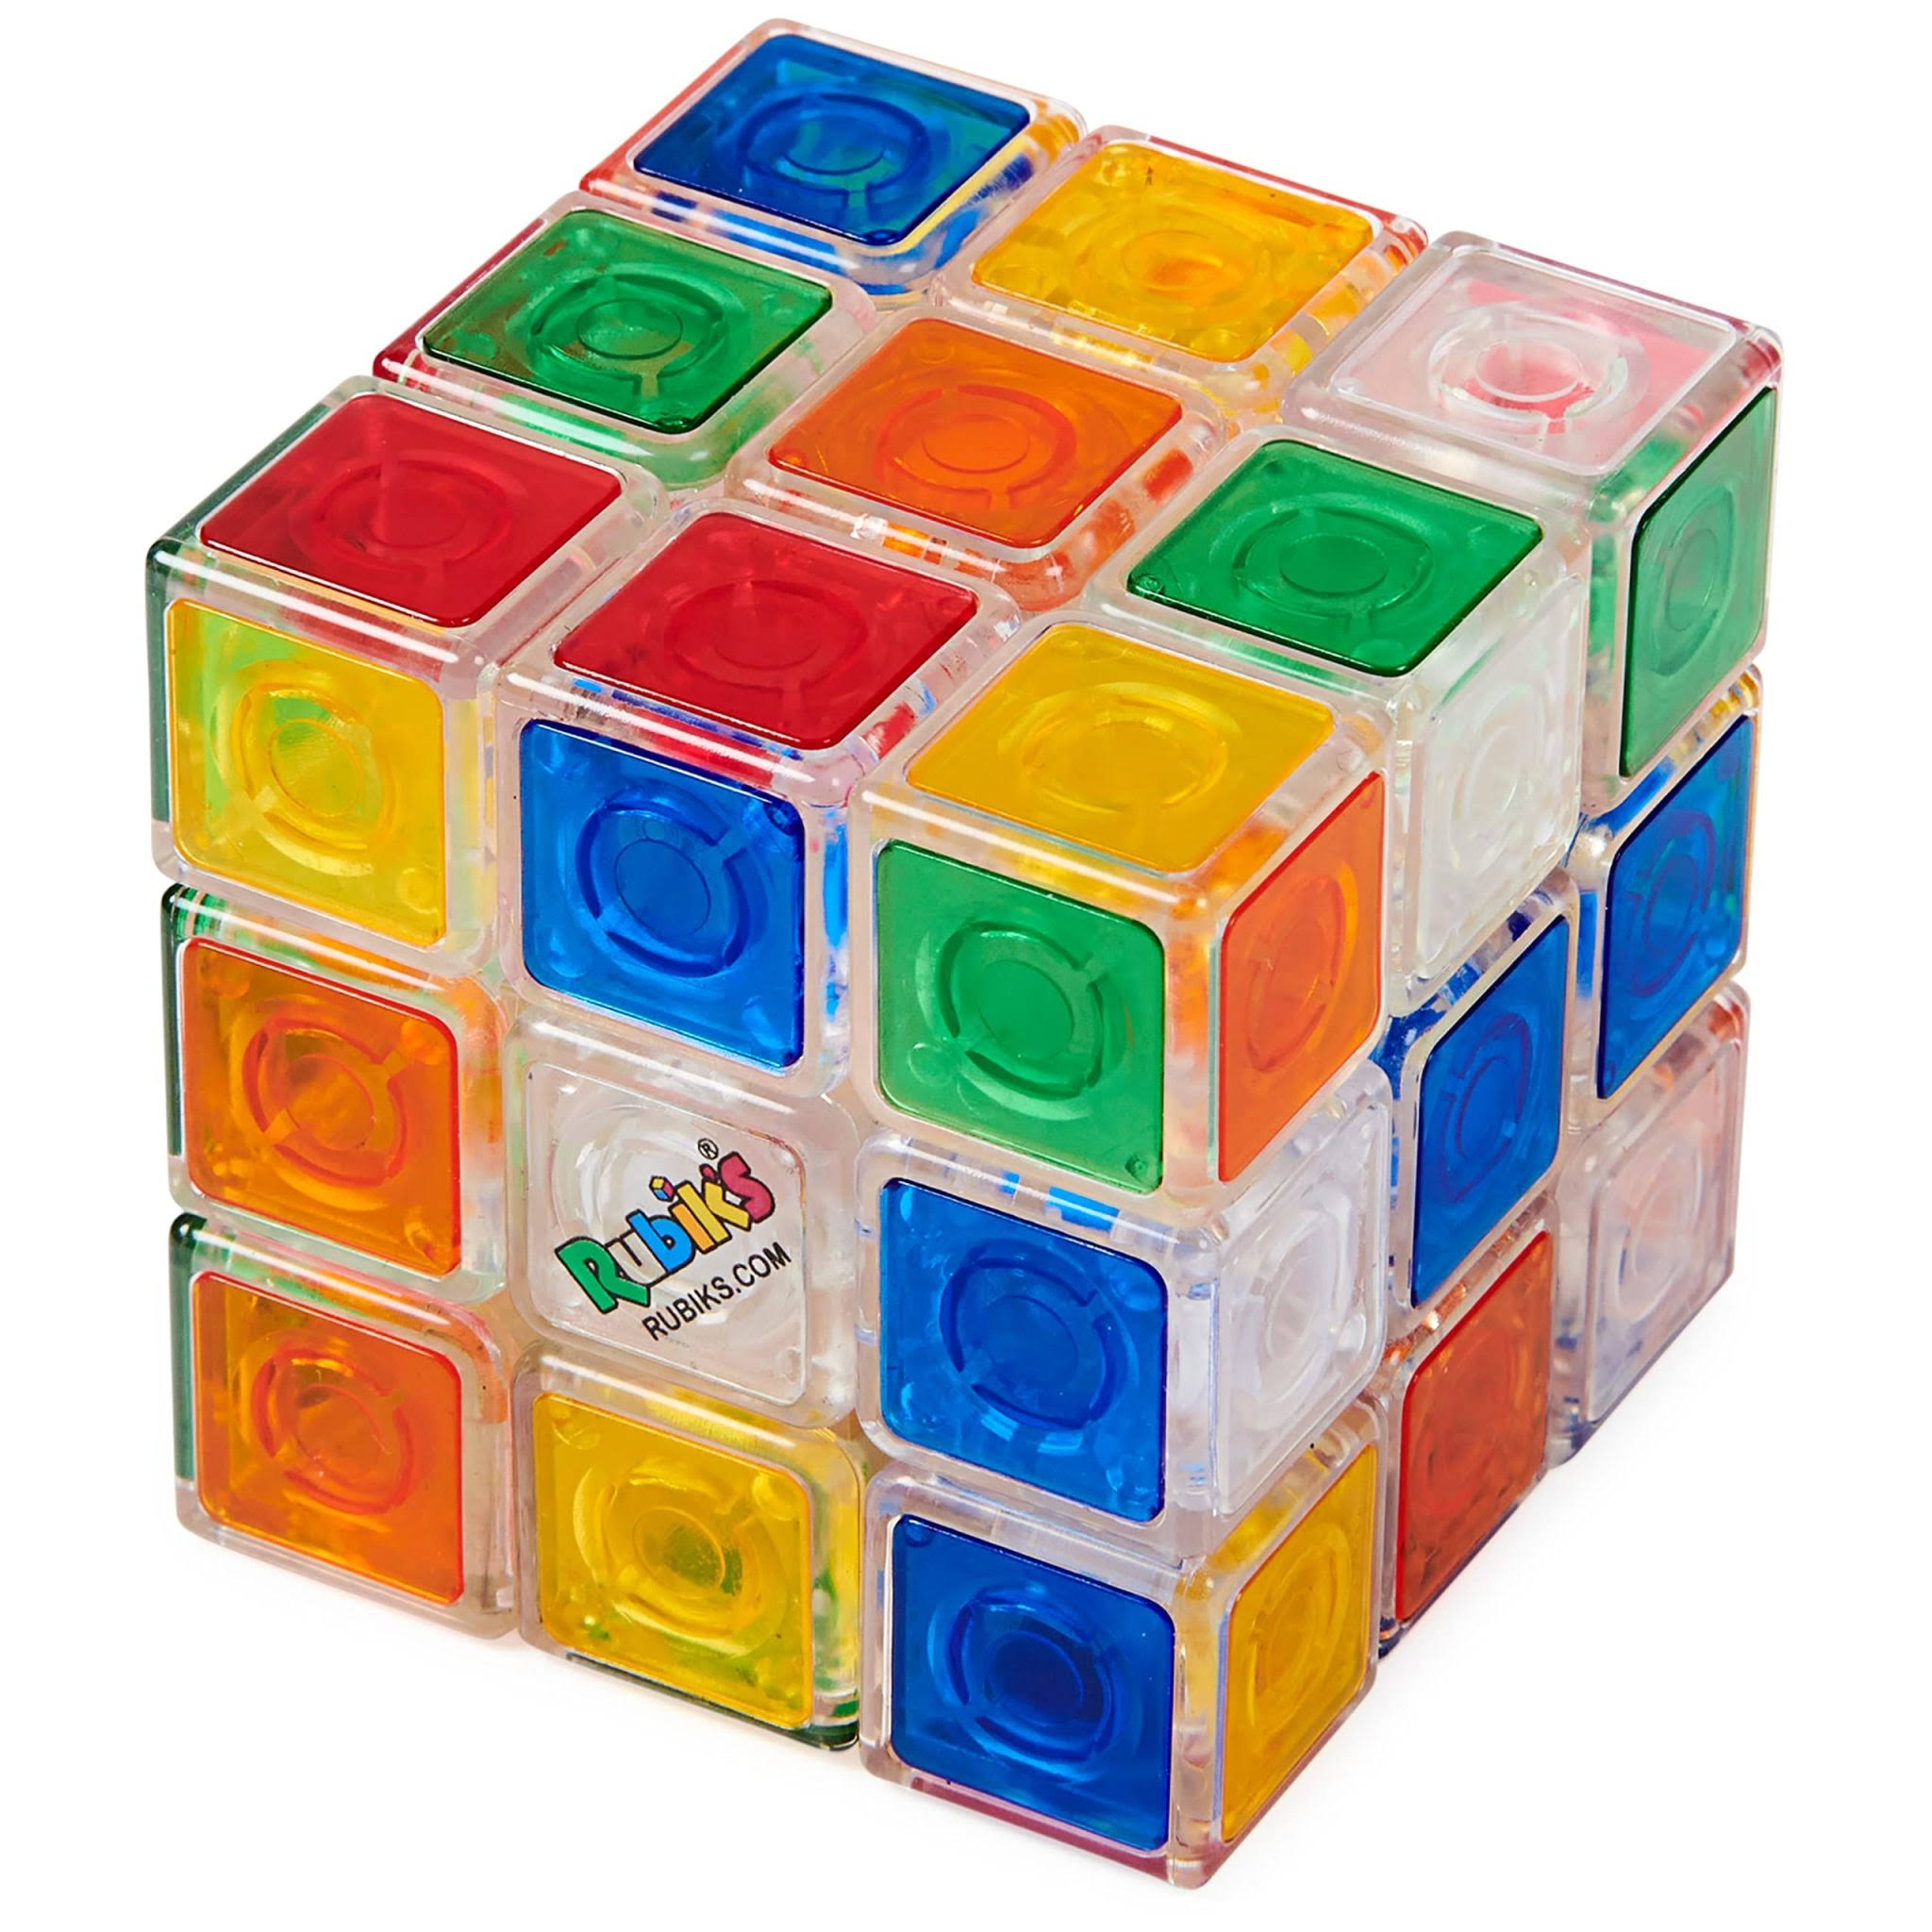 Rubik’s Crystal, New Transparent 3x3 Cube Classic Color-Matching Problem-Solving Brain Teaser Puzzle Game Toy, for Kids and Adults Aged 8 and Up